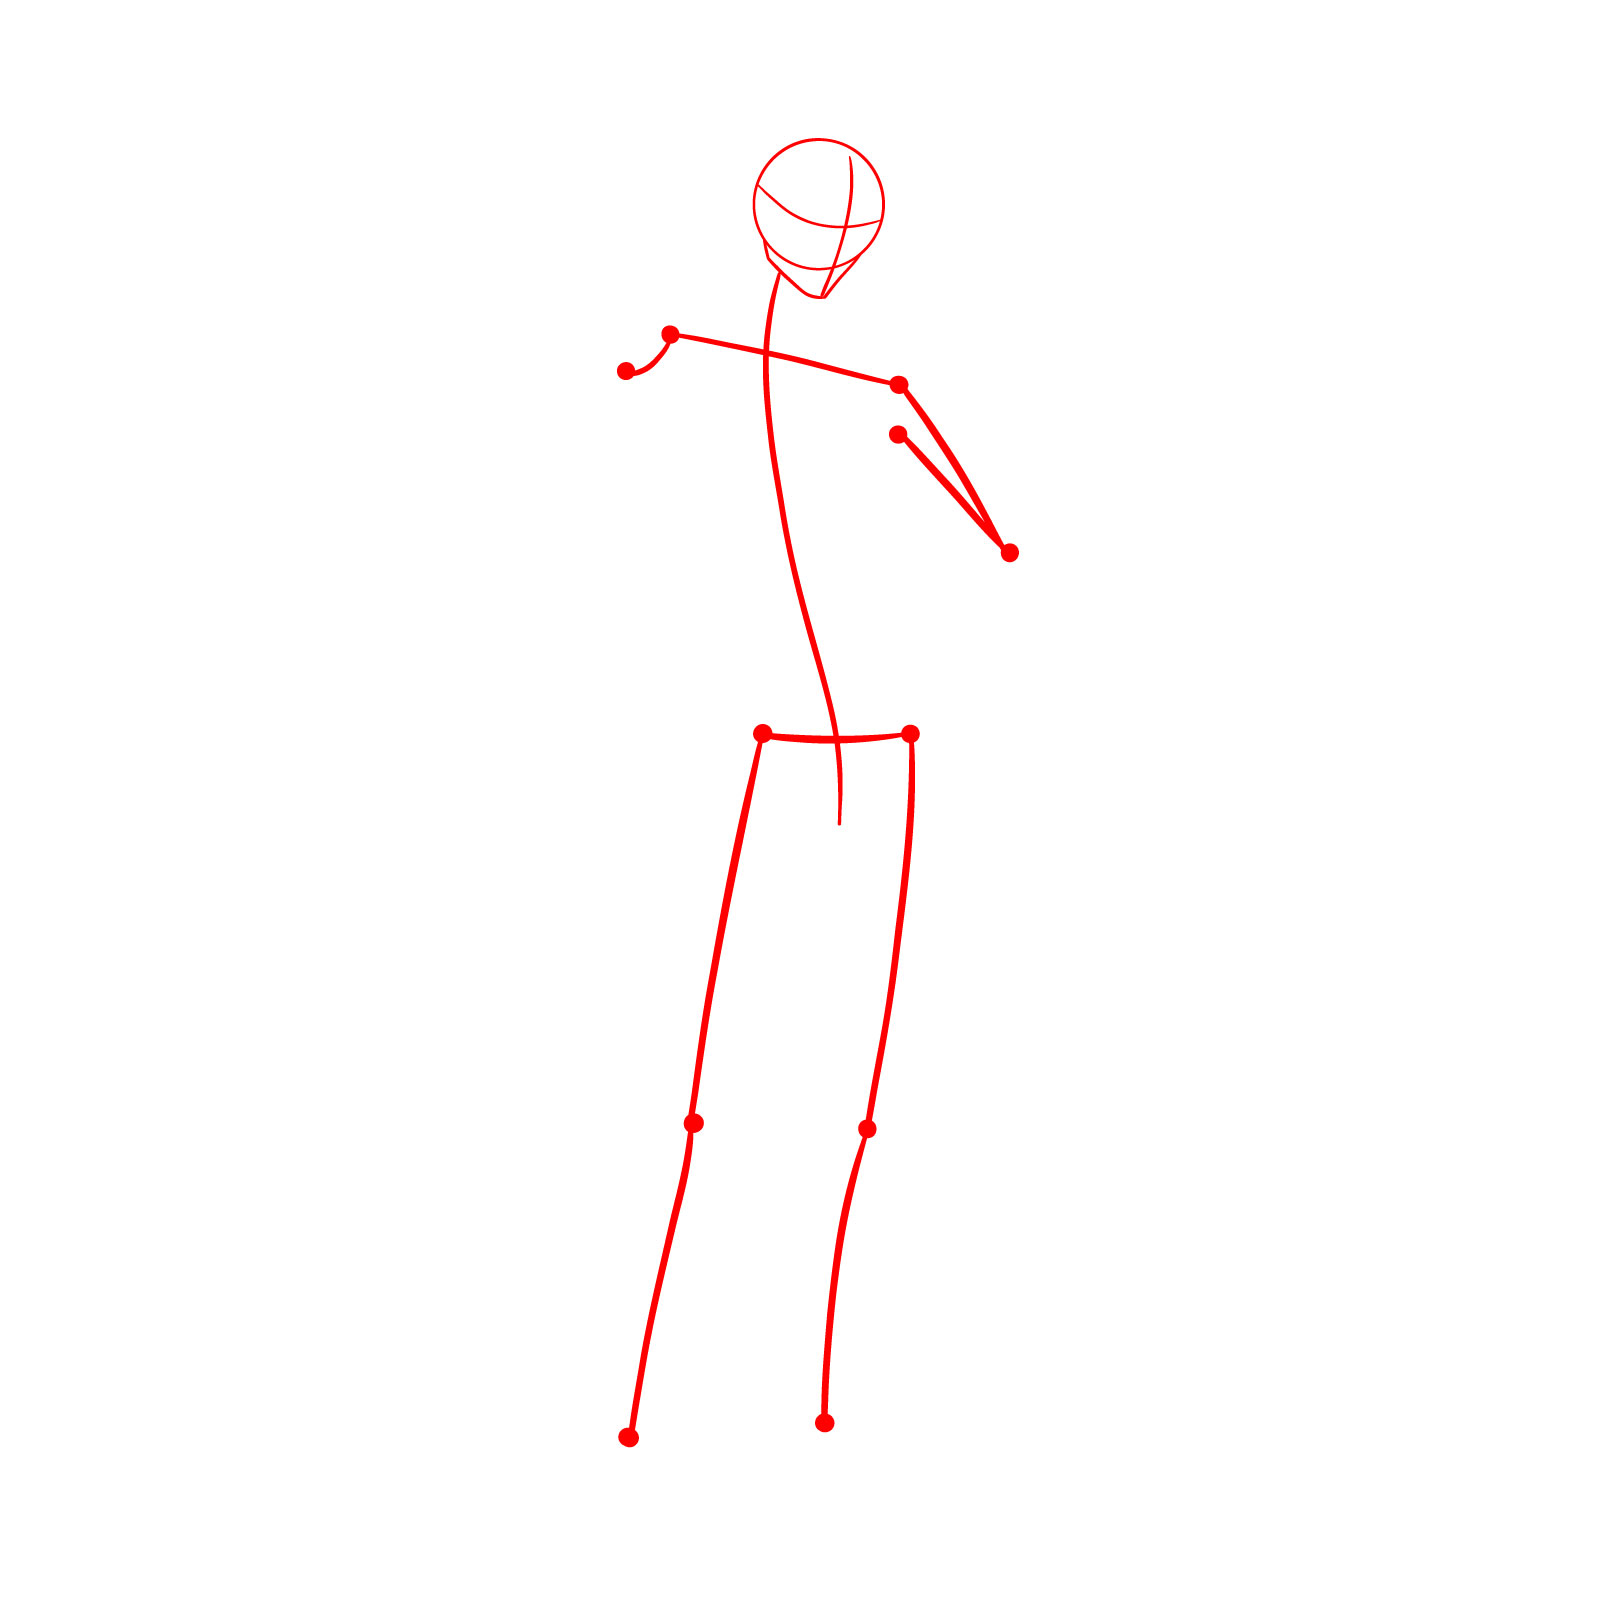 Initial sketch of Satoru Gojo's basic stick figure drawing, focusing on posture and proportions. - step 01